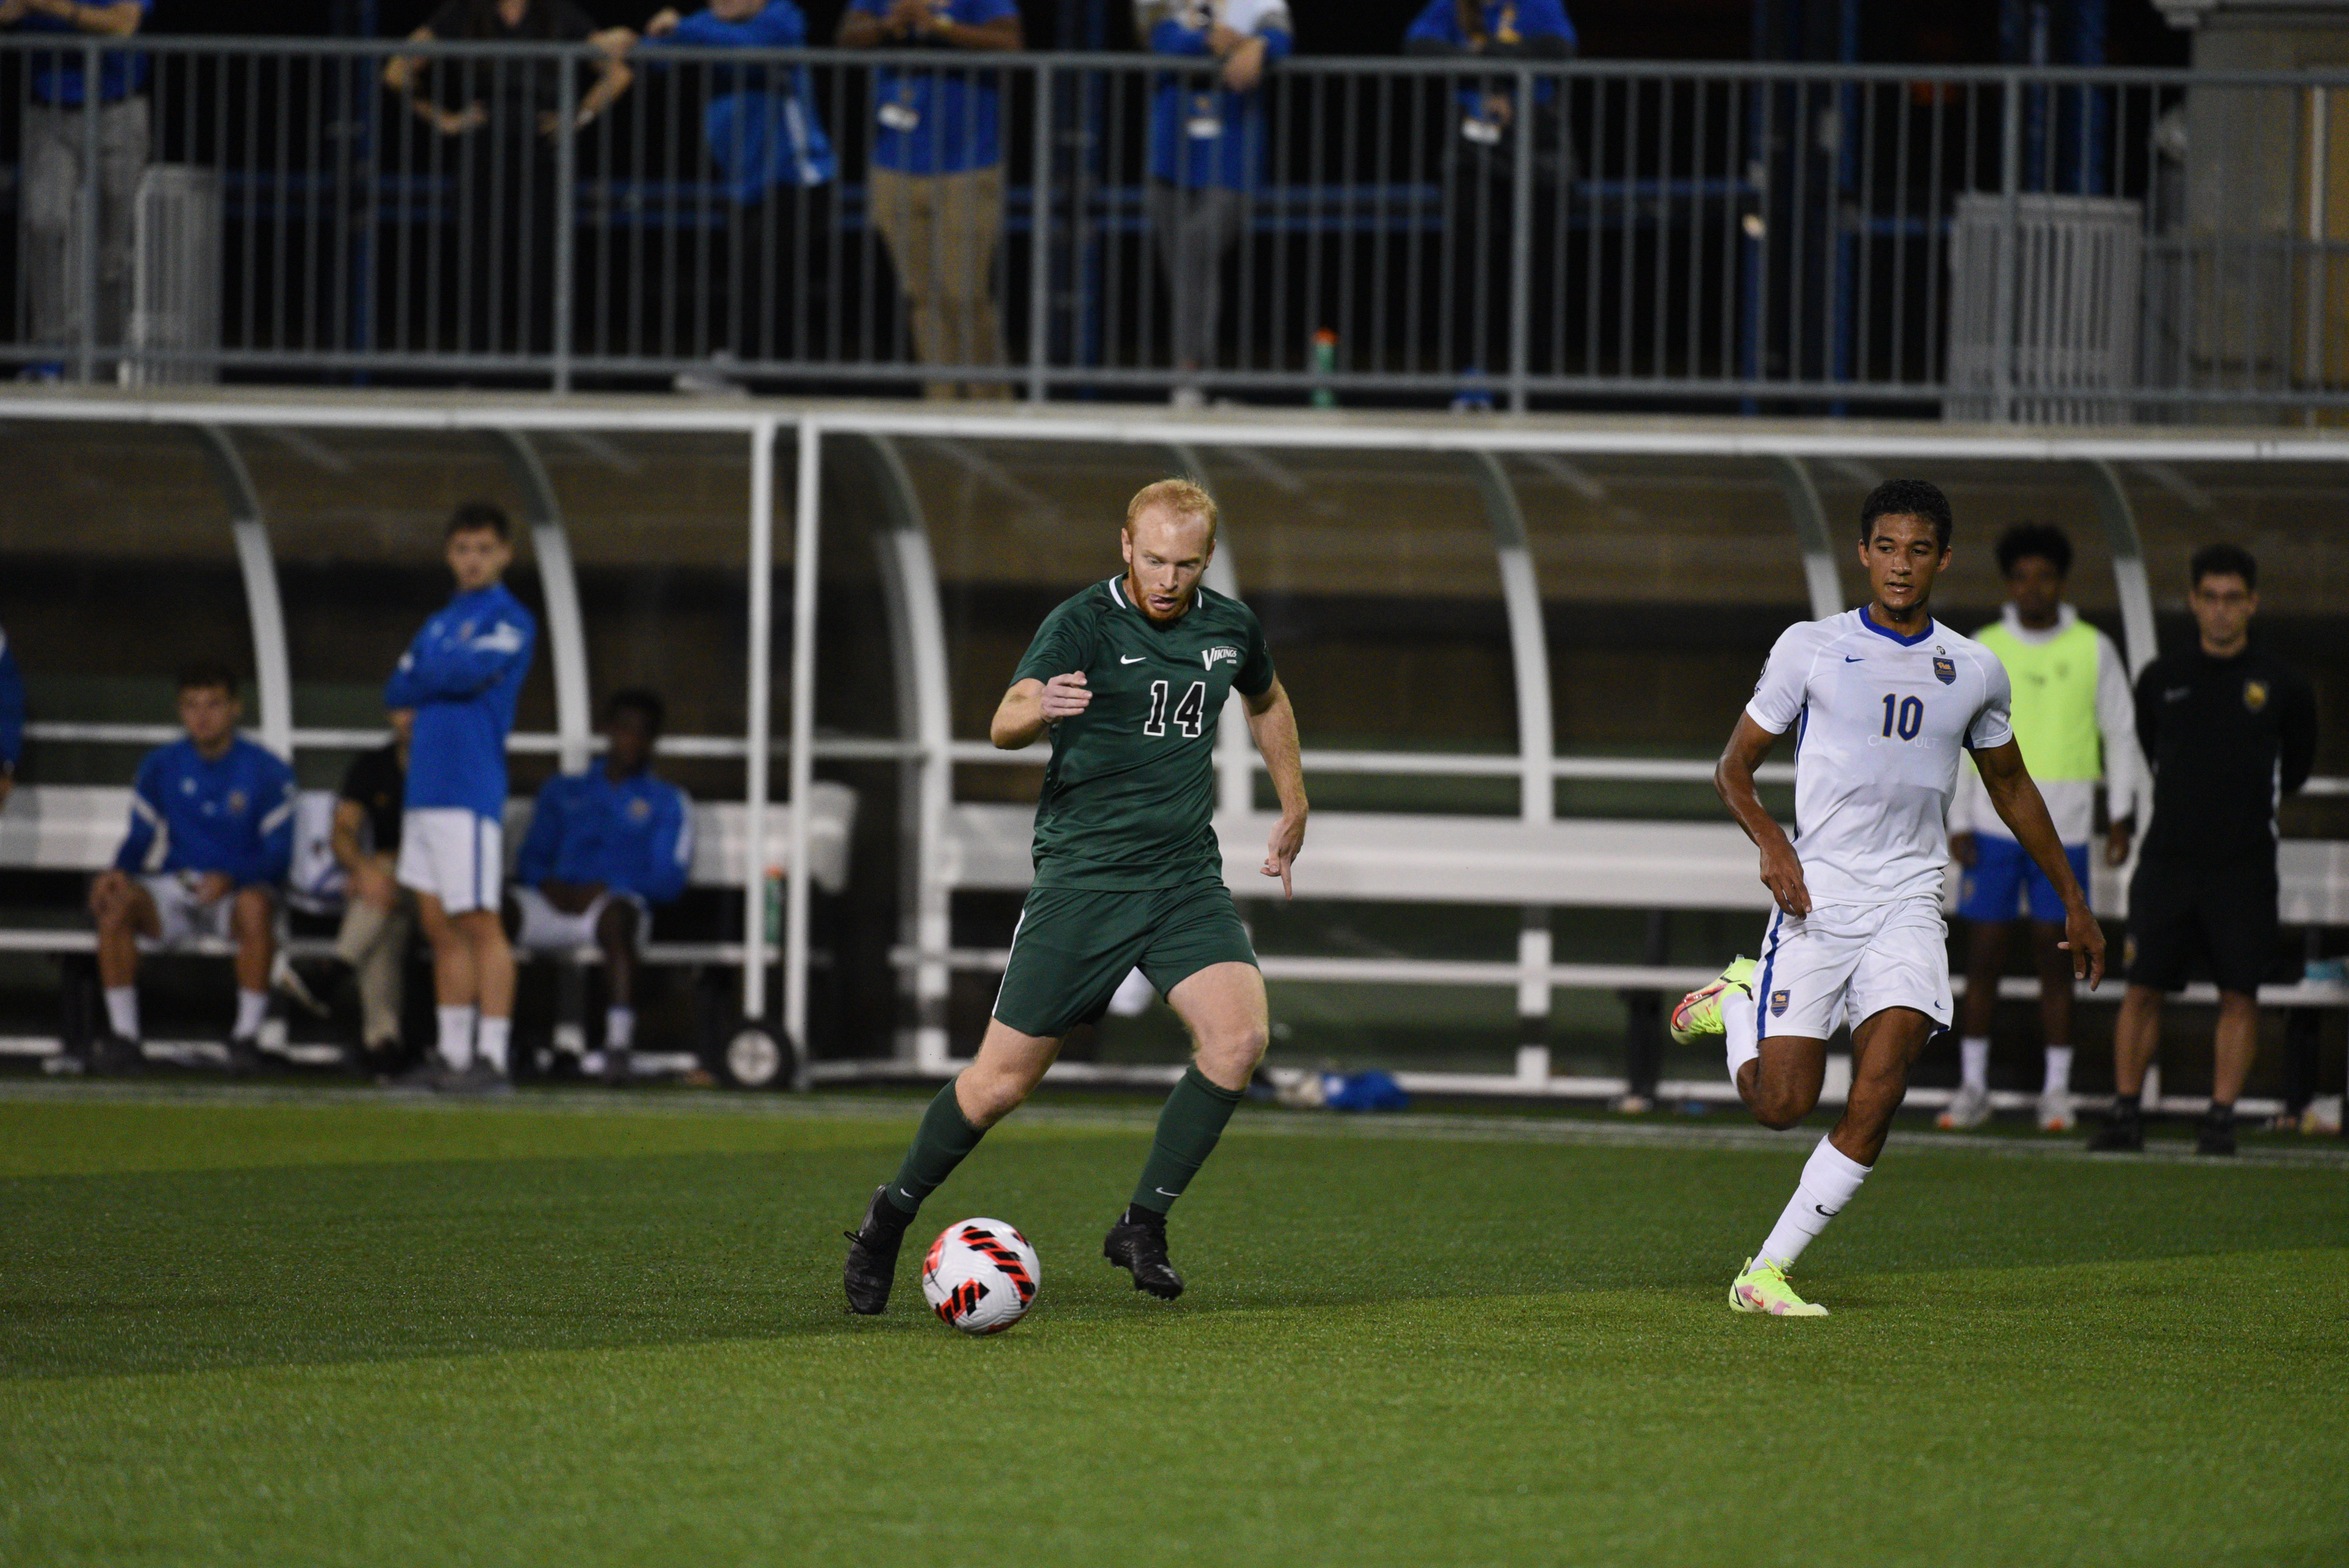 Cleveland State Men's Soccer Falls to No. 13 Pitt